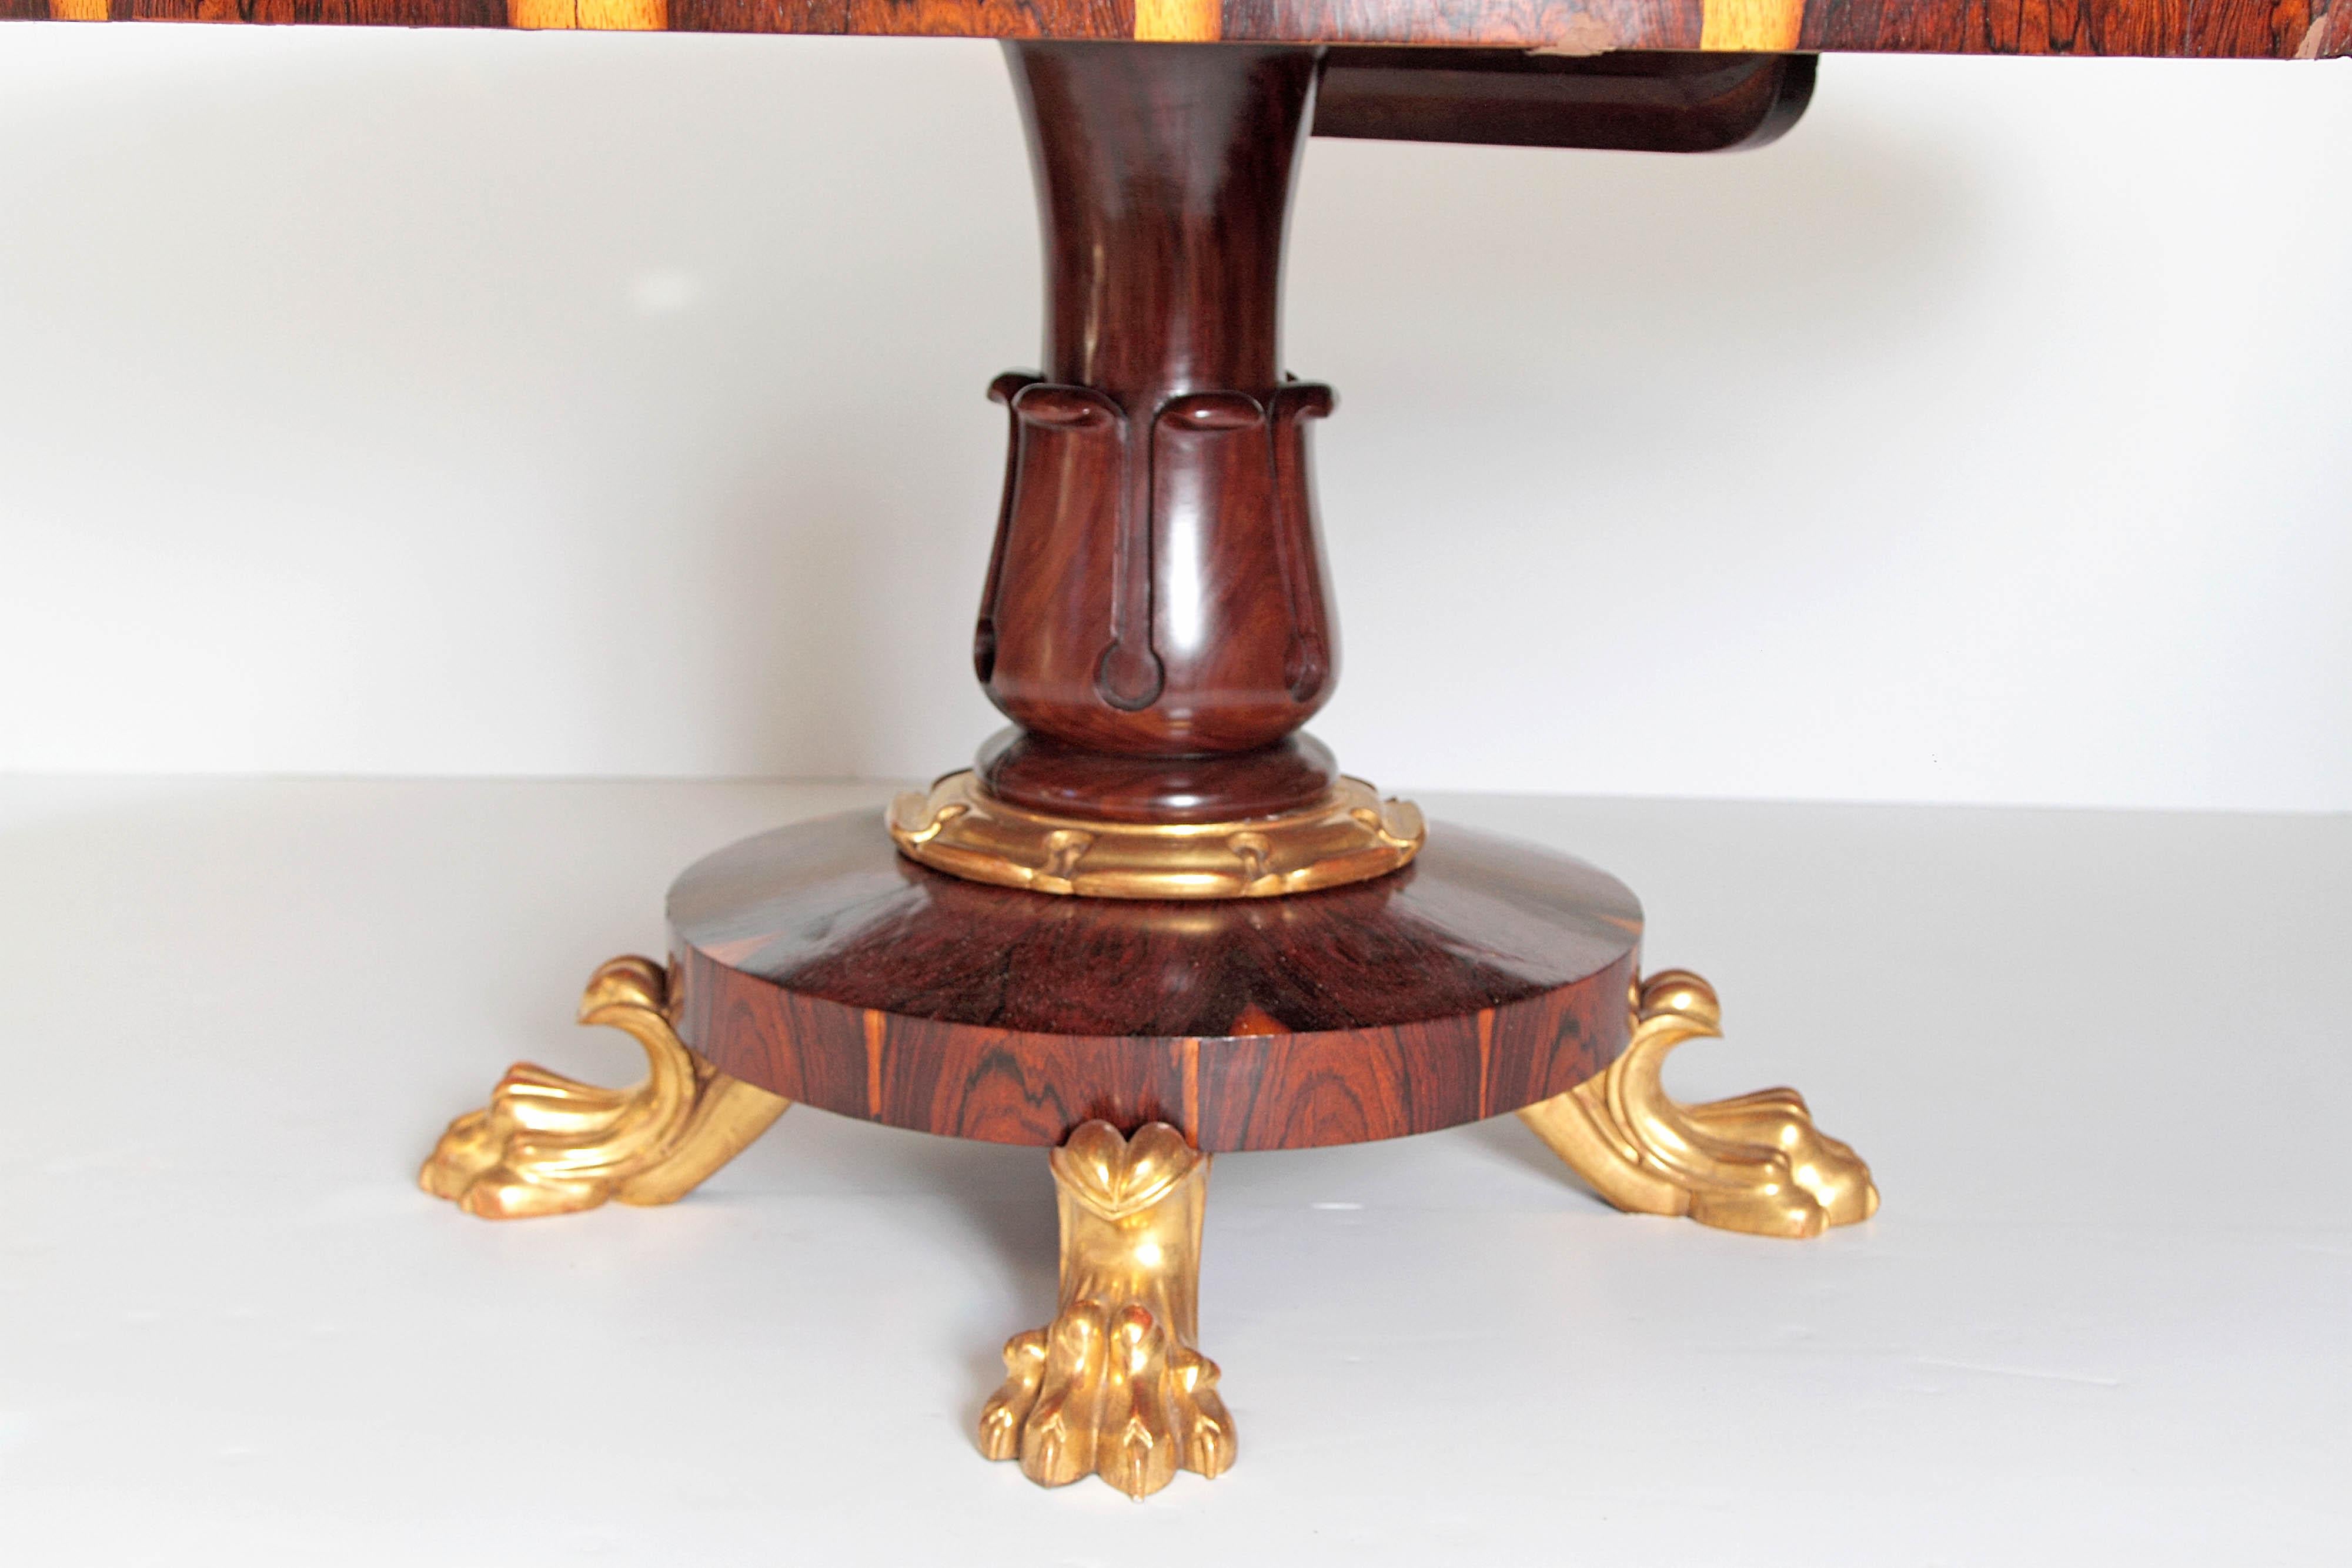 Wood Period English Regency Centre Table of Exotic Calamander